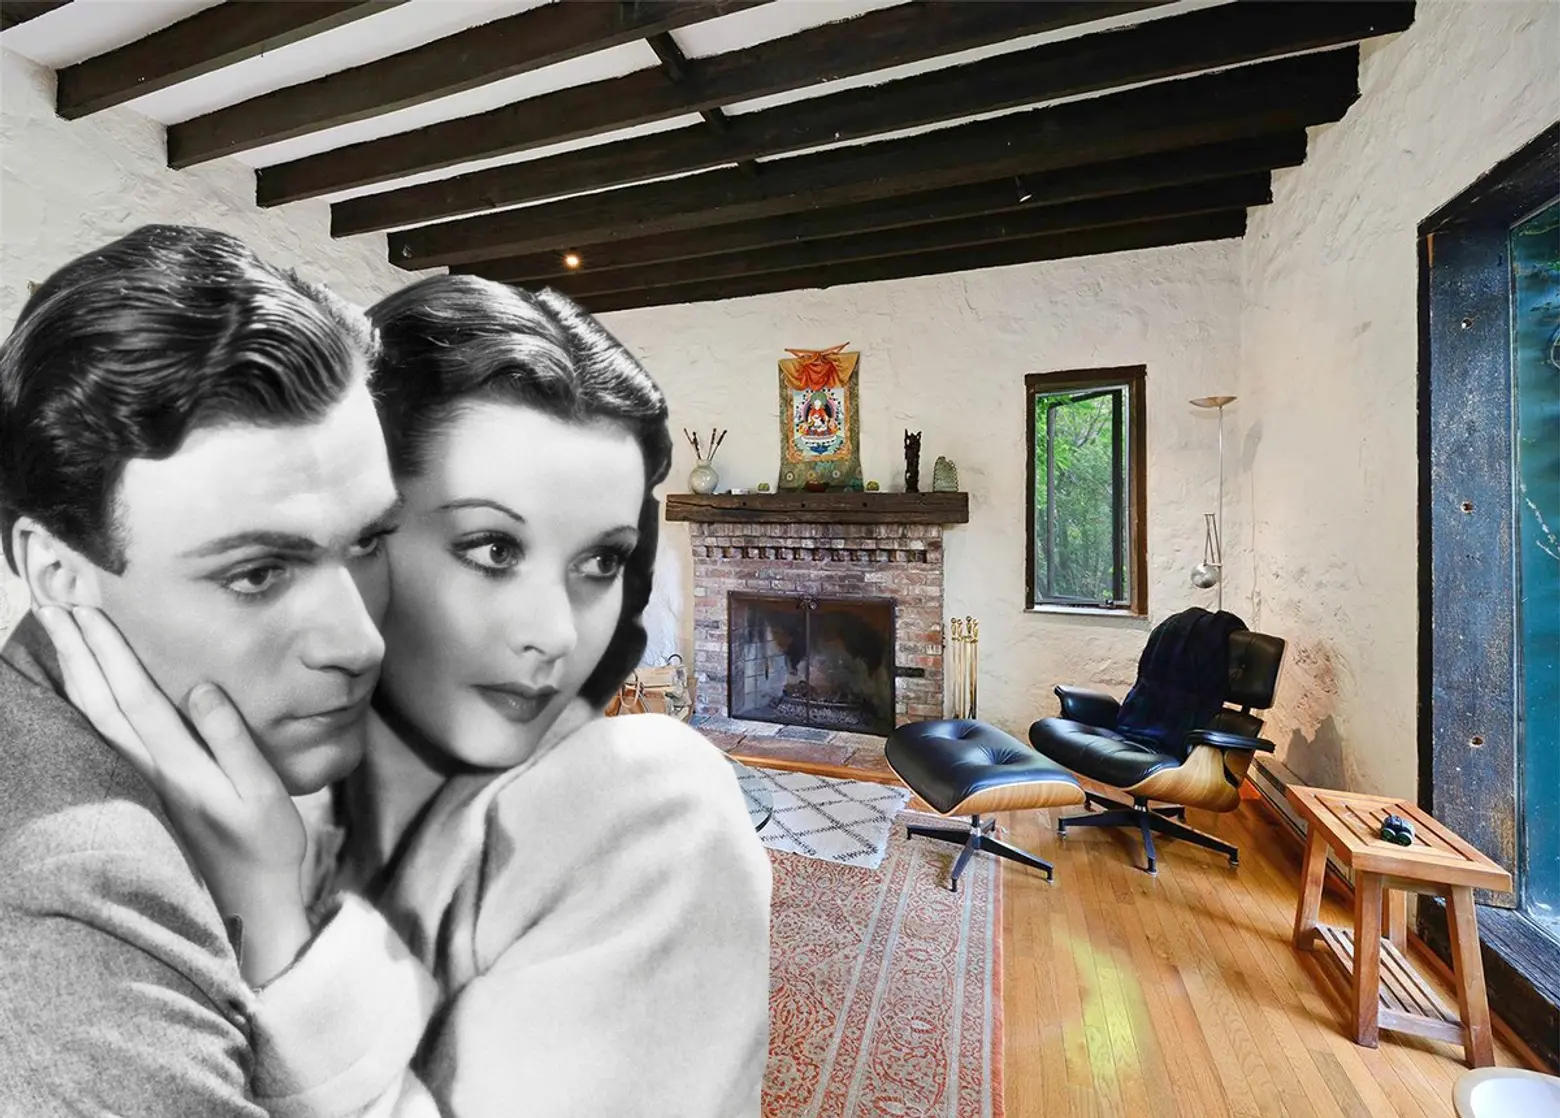 Historic upstate charmer once owned by Vivien Leigh and Laurence Olivier asks $5.5M